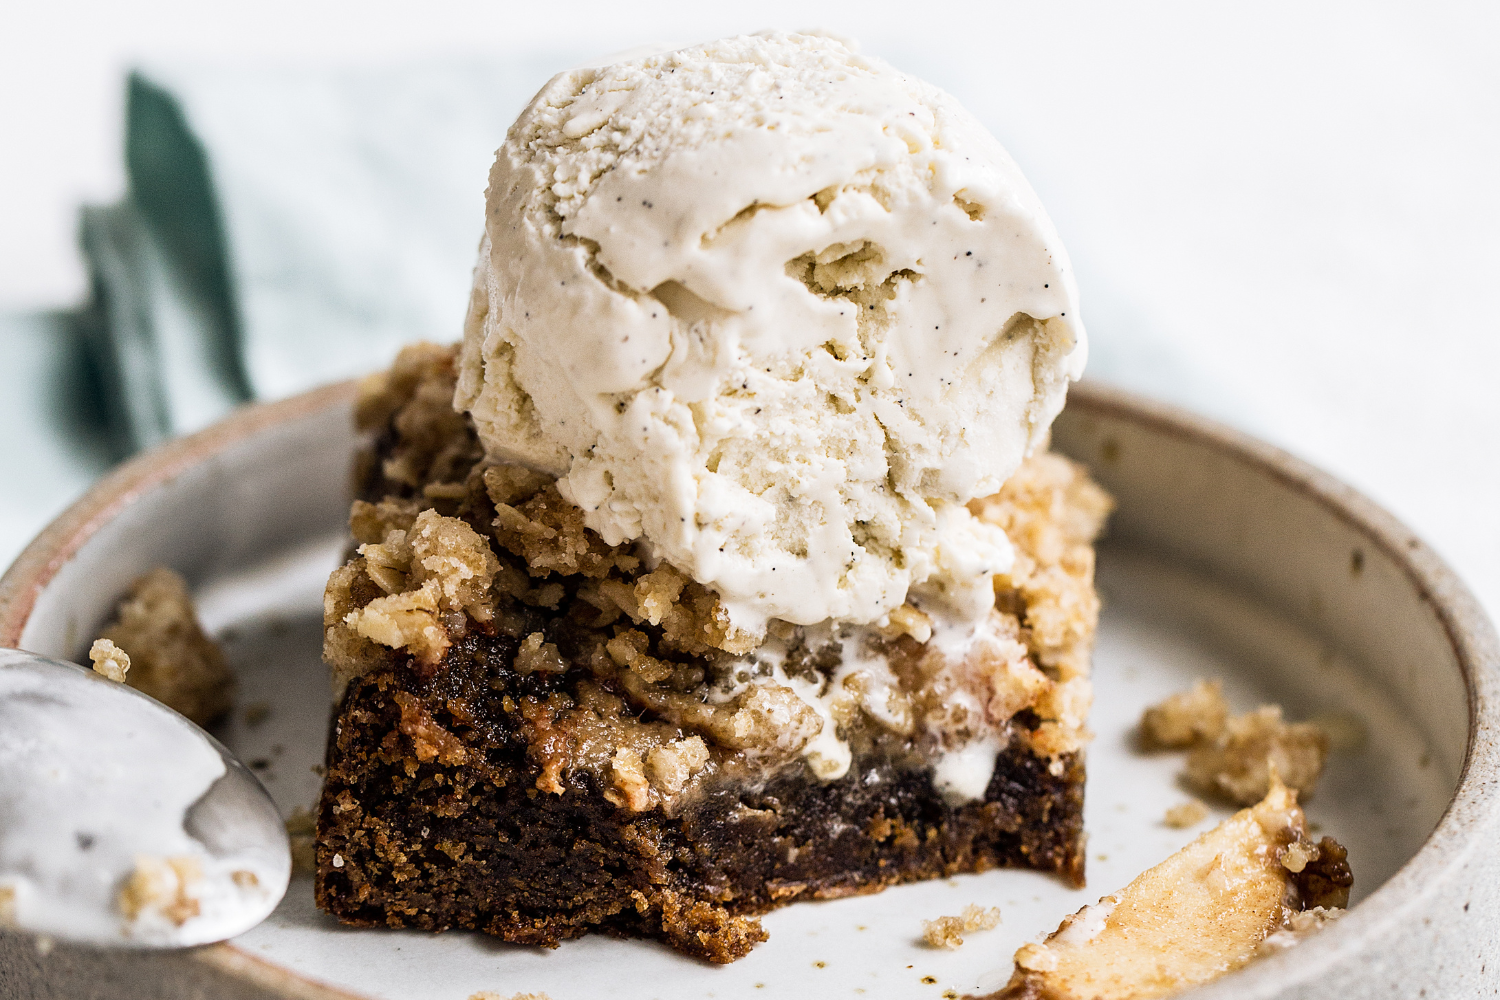 Easy non-pie dessert option for Friendsgiving: Apple Crisp Cookie bar on a plate, with a scoop of vanilla ice cream on top.